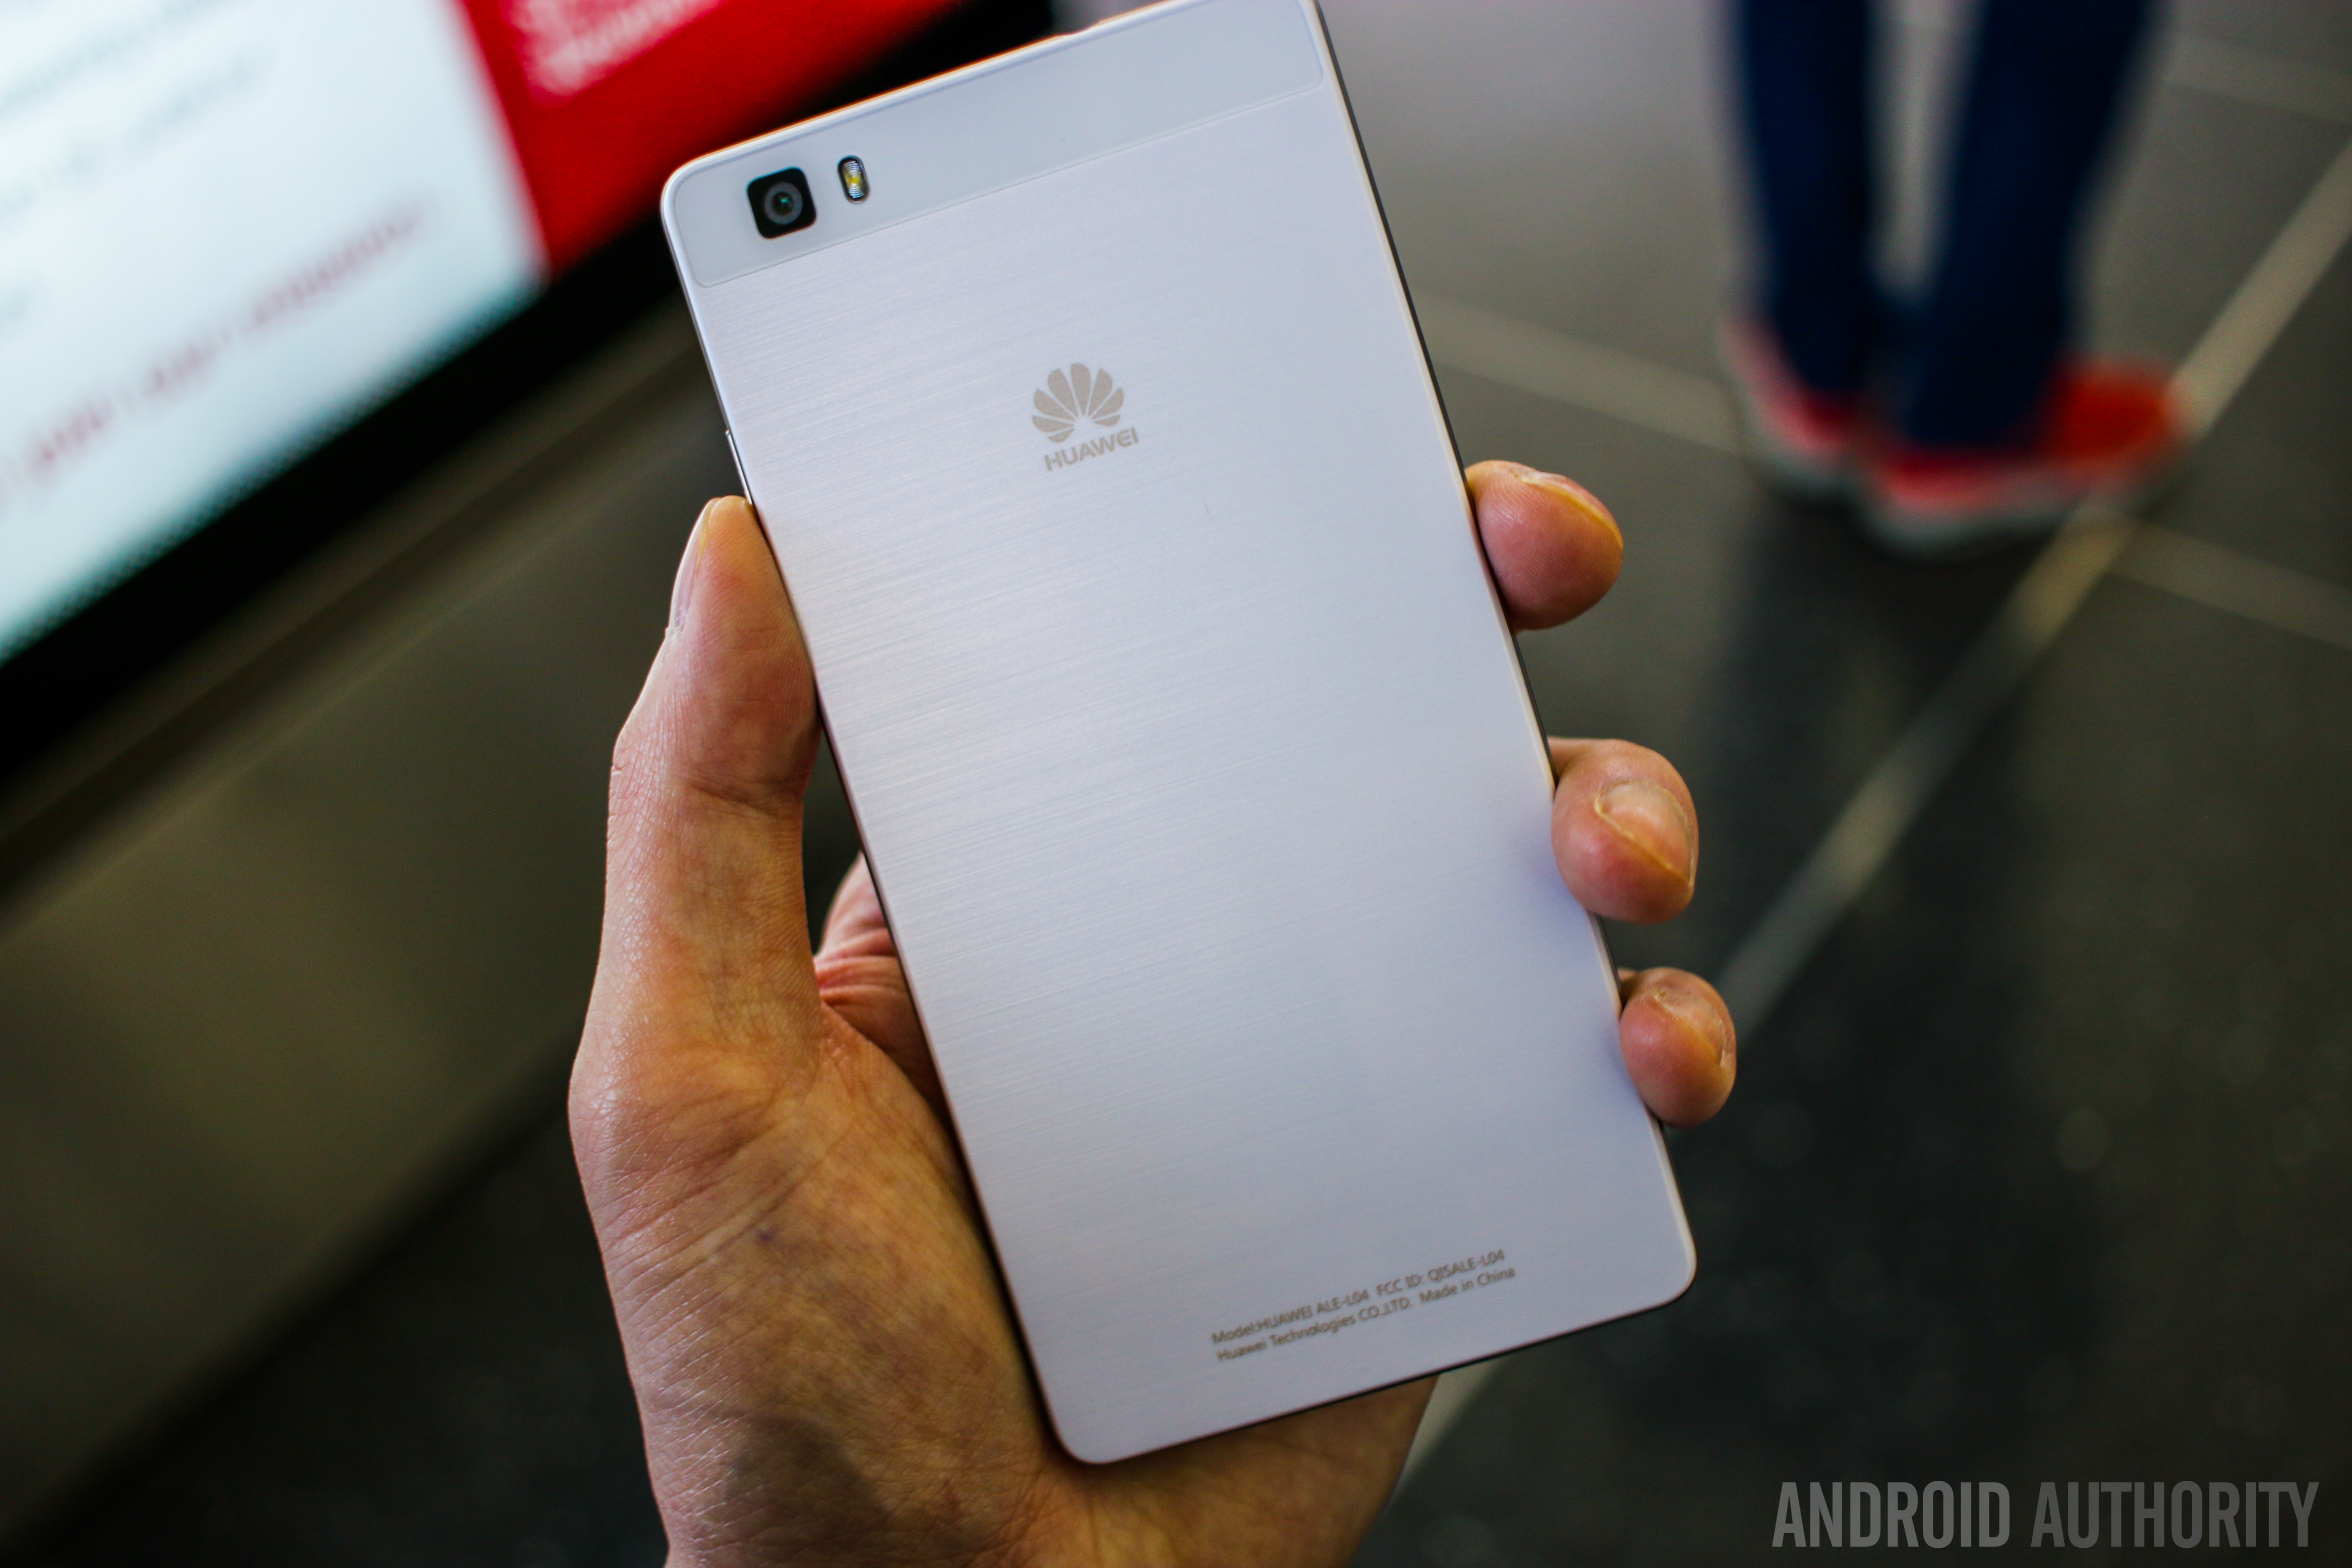 Huh Trojaanse paard mentaal HUAWEI P8 Lite announced, coming to the U.S. today